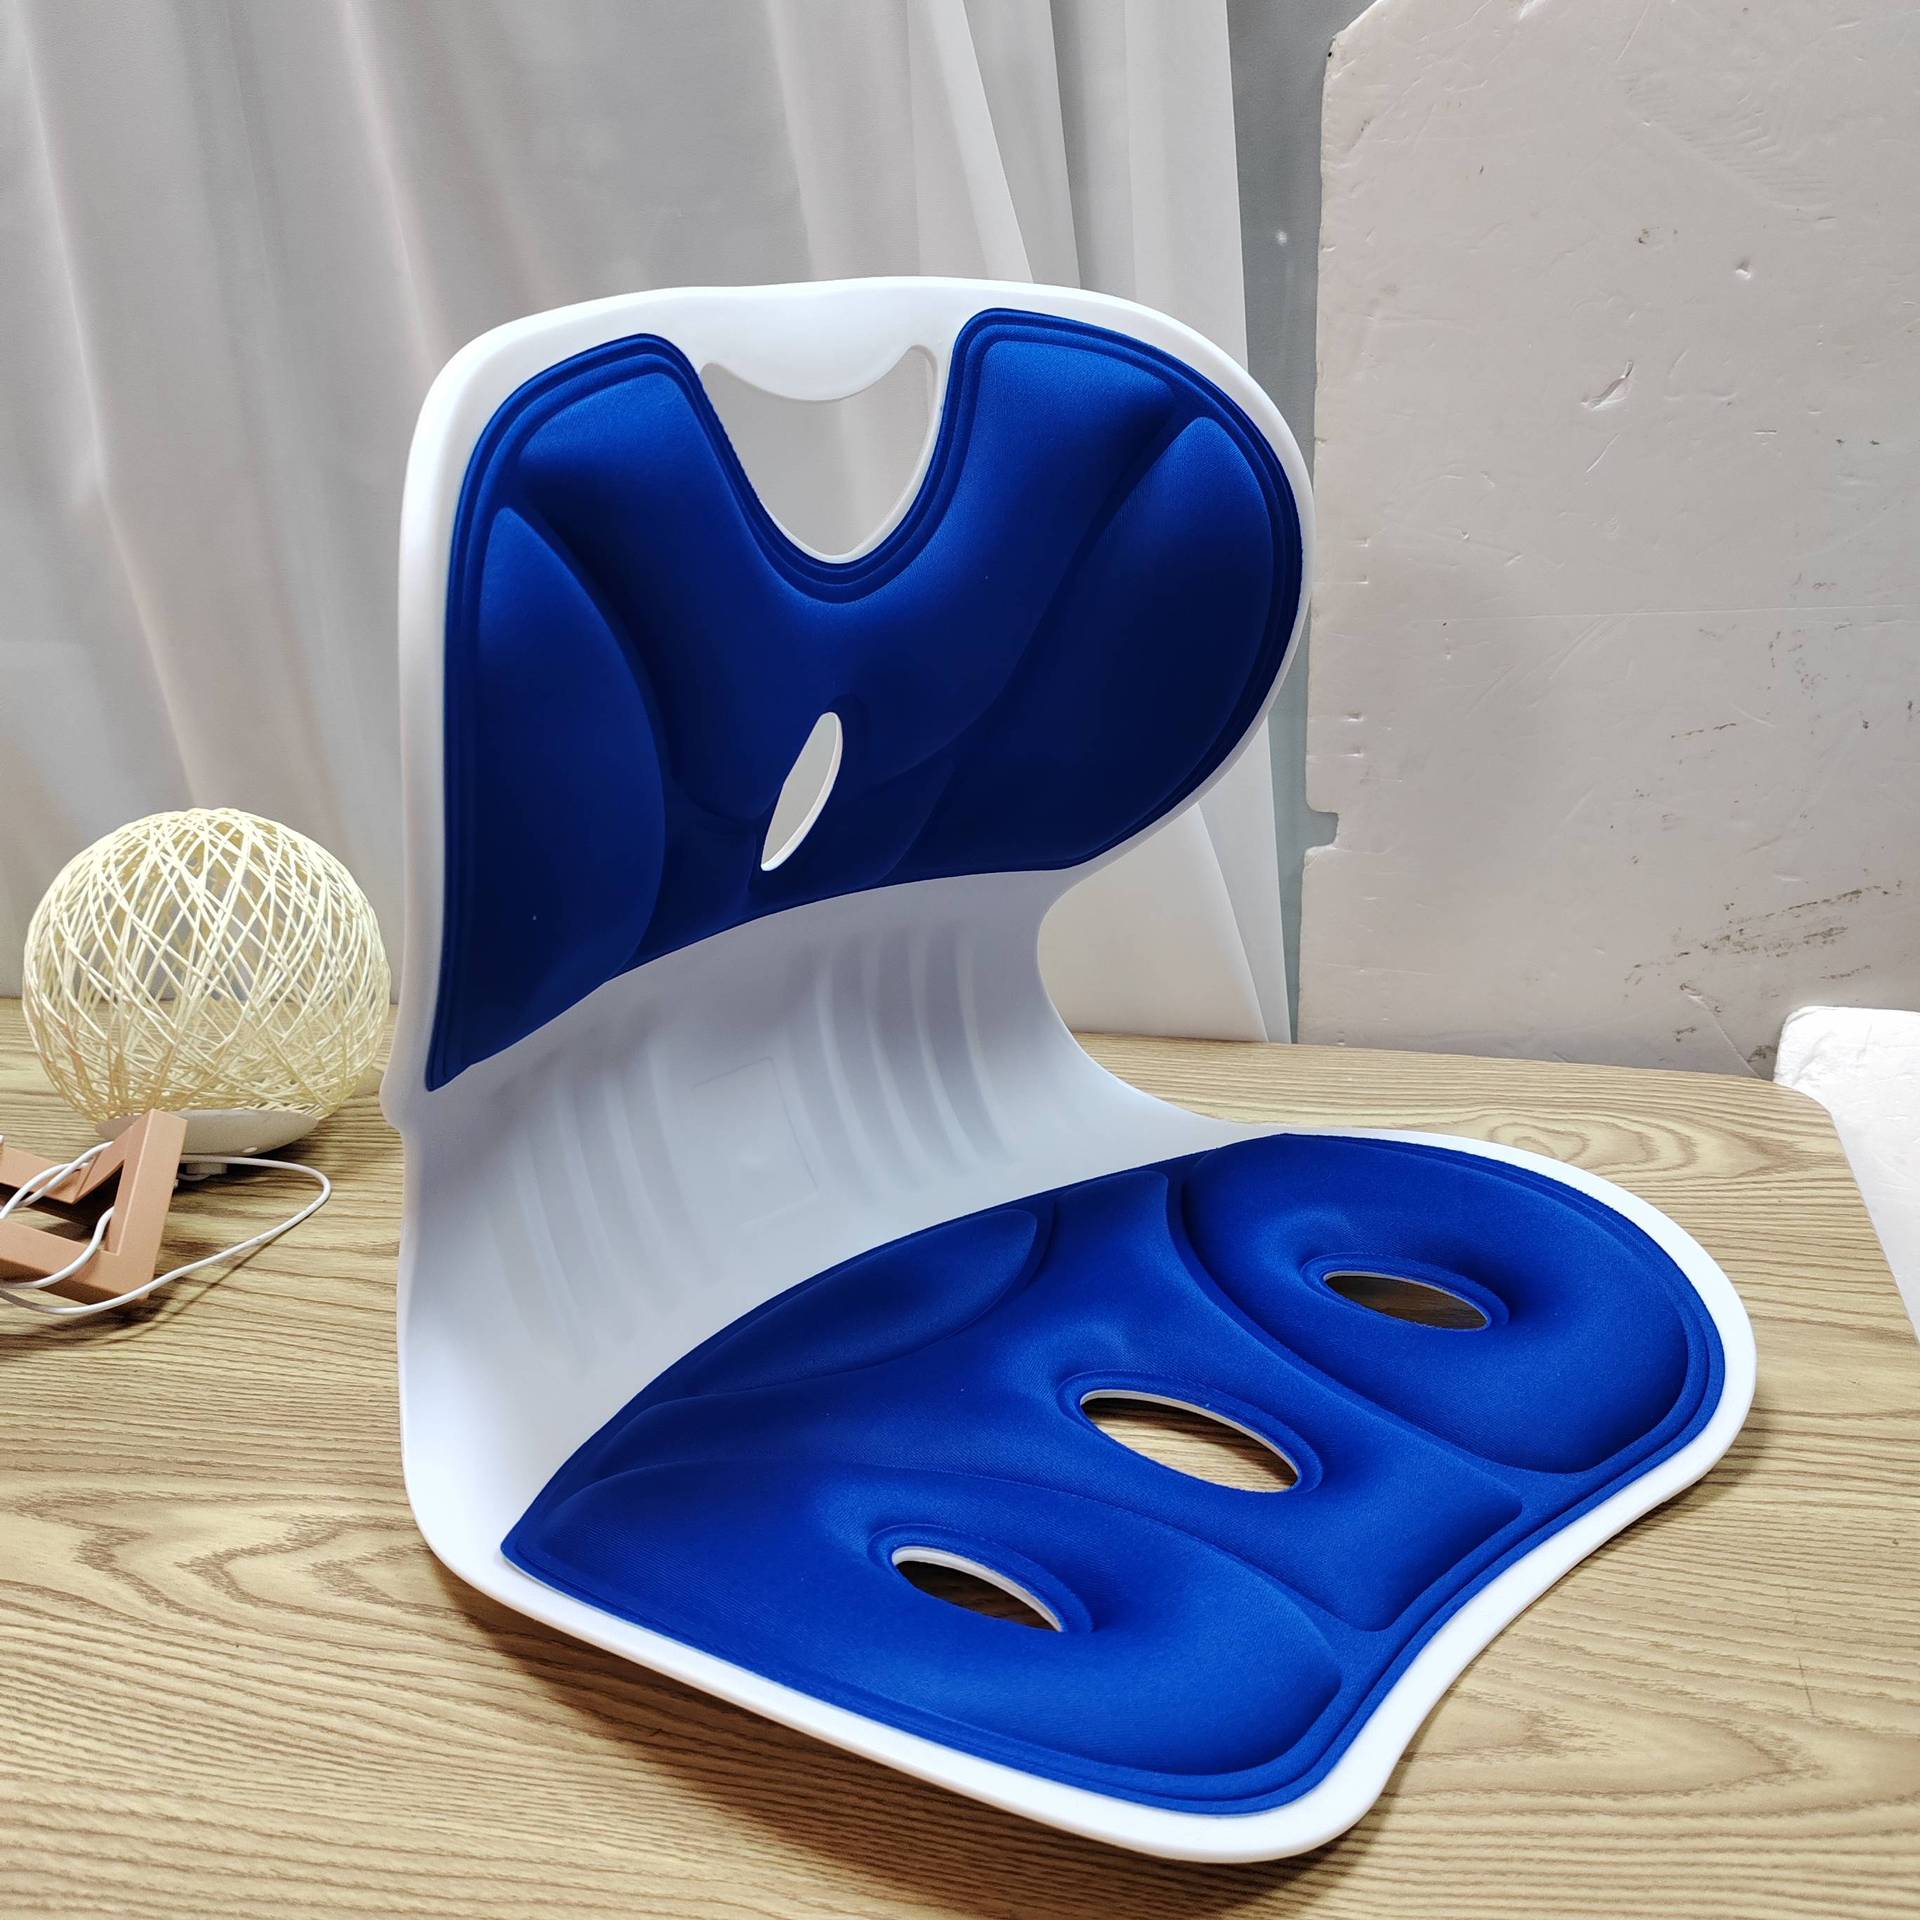 Student Children's Cushion Chair Waist Support Cushion Chair for Sitting Posture Correction Correction Sitting Posture for a Long Time Not Tired Office Waist Support Cushion